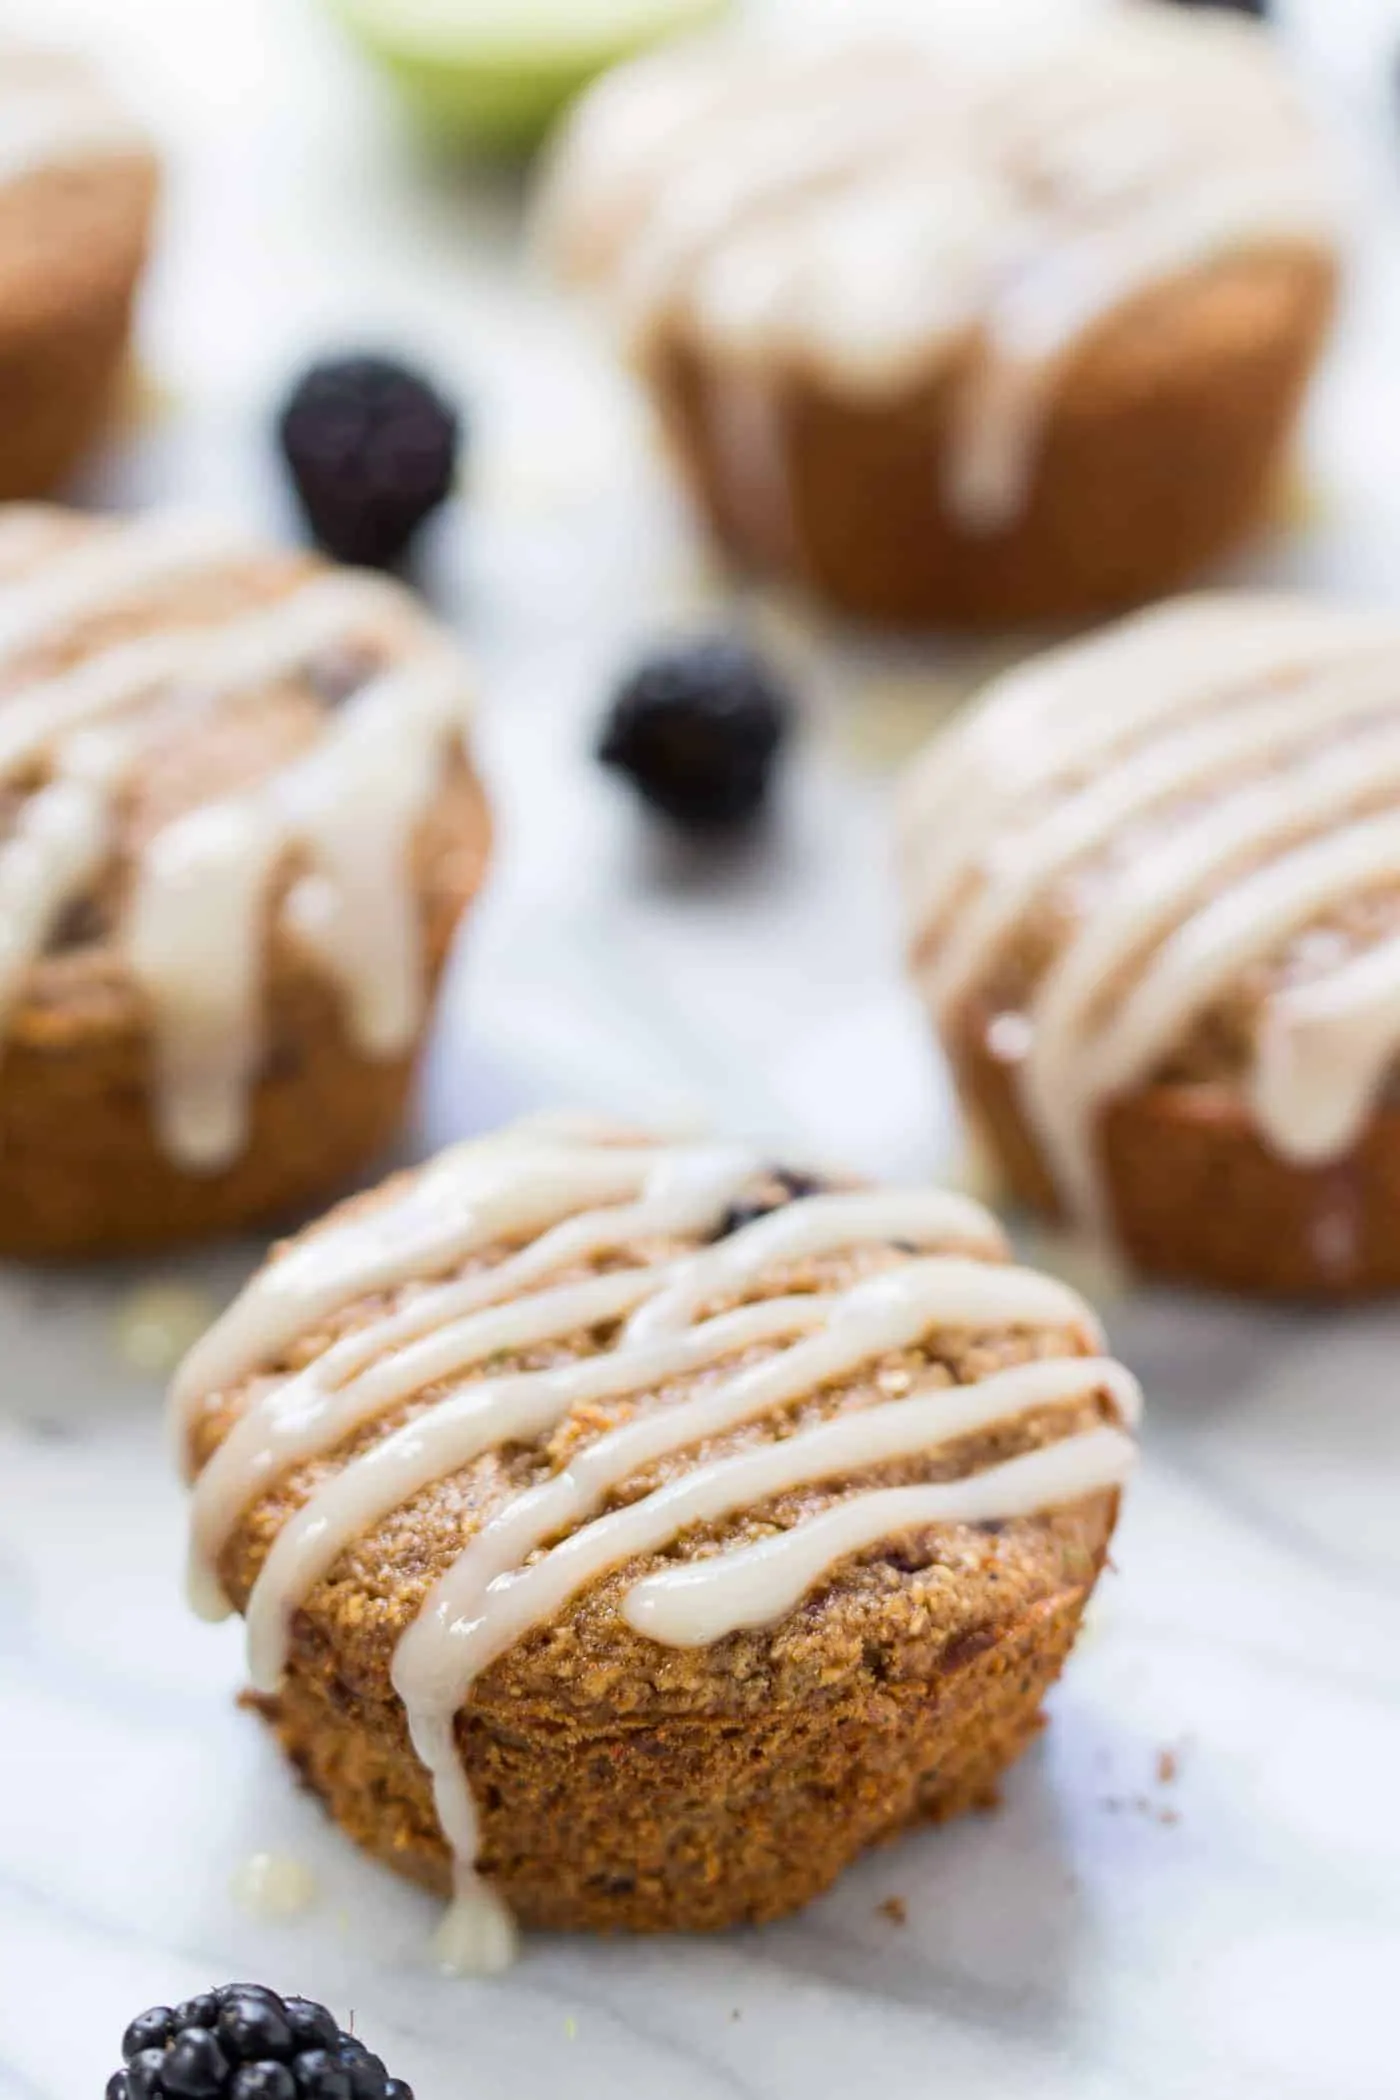 Blackberry Lime Oatmeal Muffins topped with a creamy coconut butter glaze! Naturally gluten-free, without any dairy, oils or eggs!